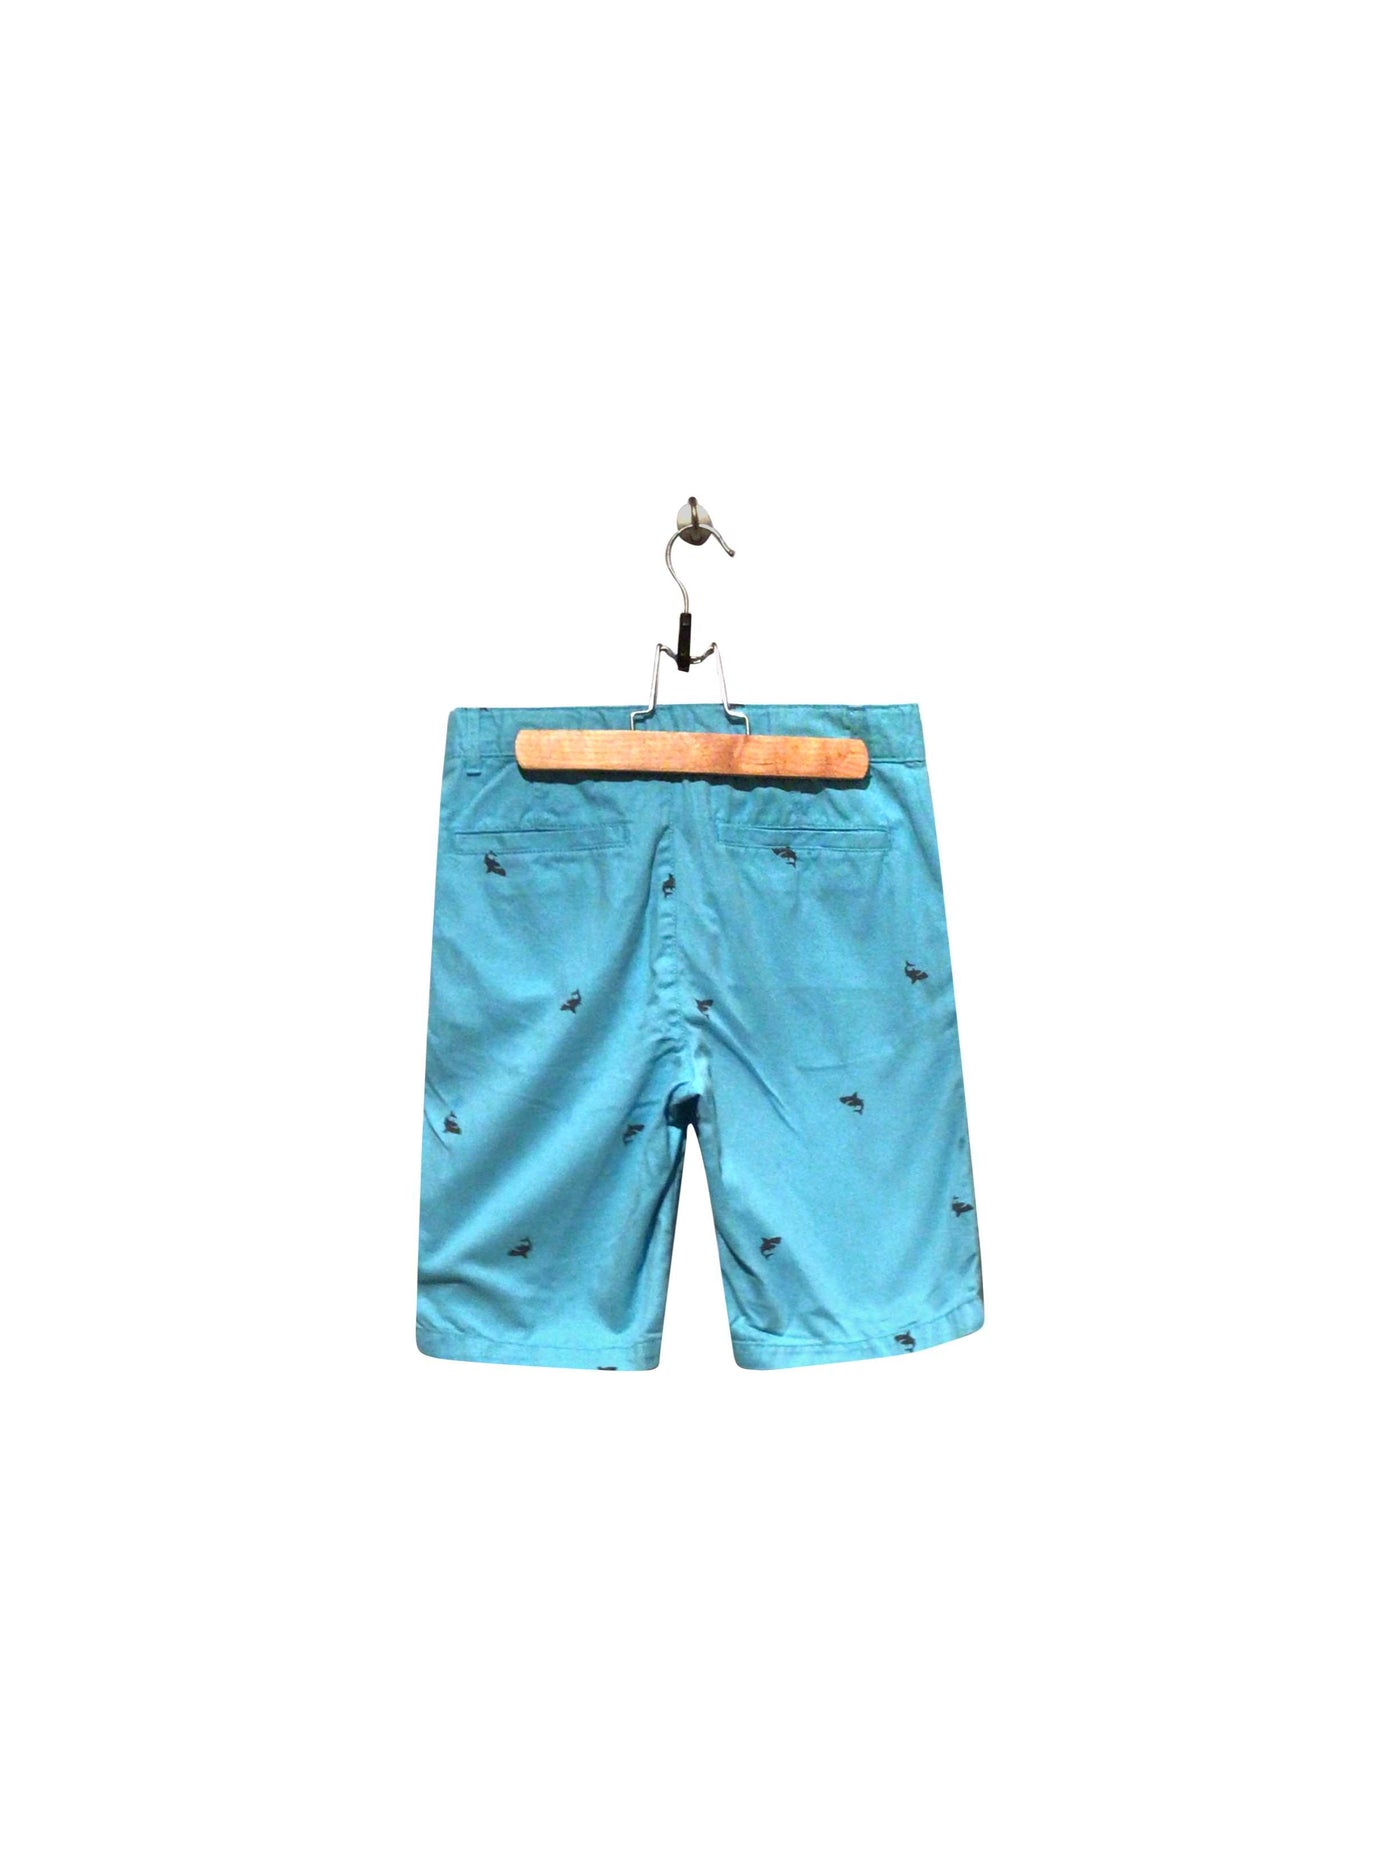 THE CHILDREN'S PLACE Regular fit Pant Shorts in Blue  -  12